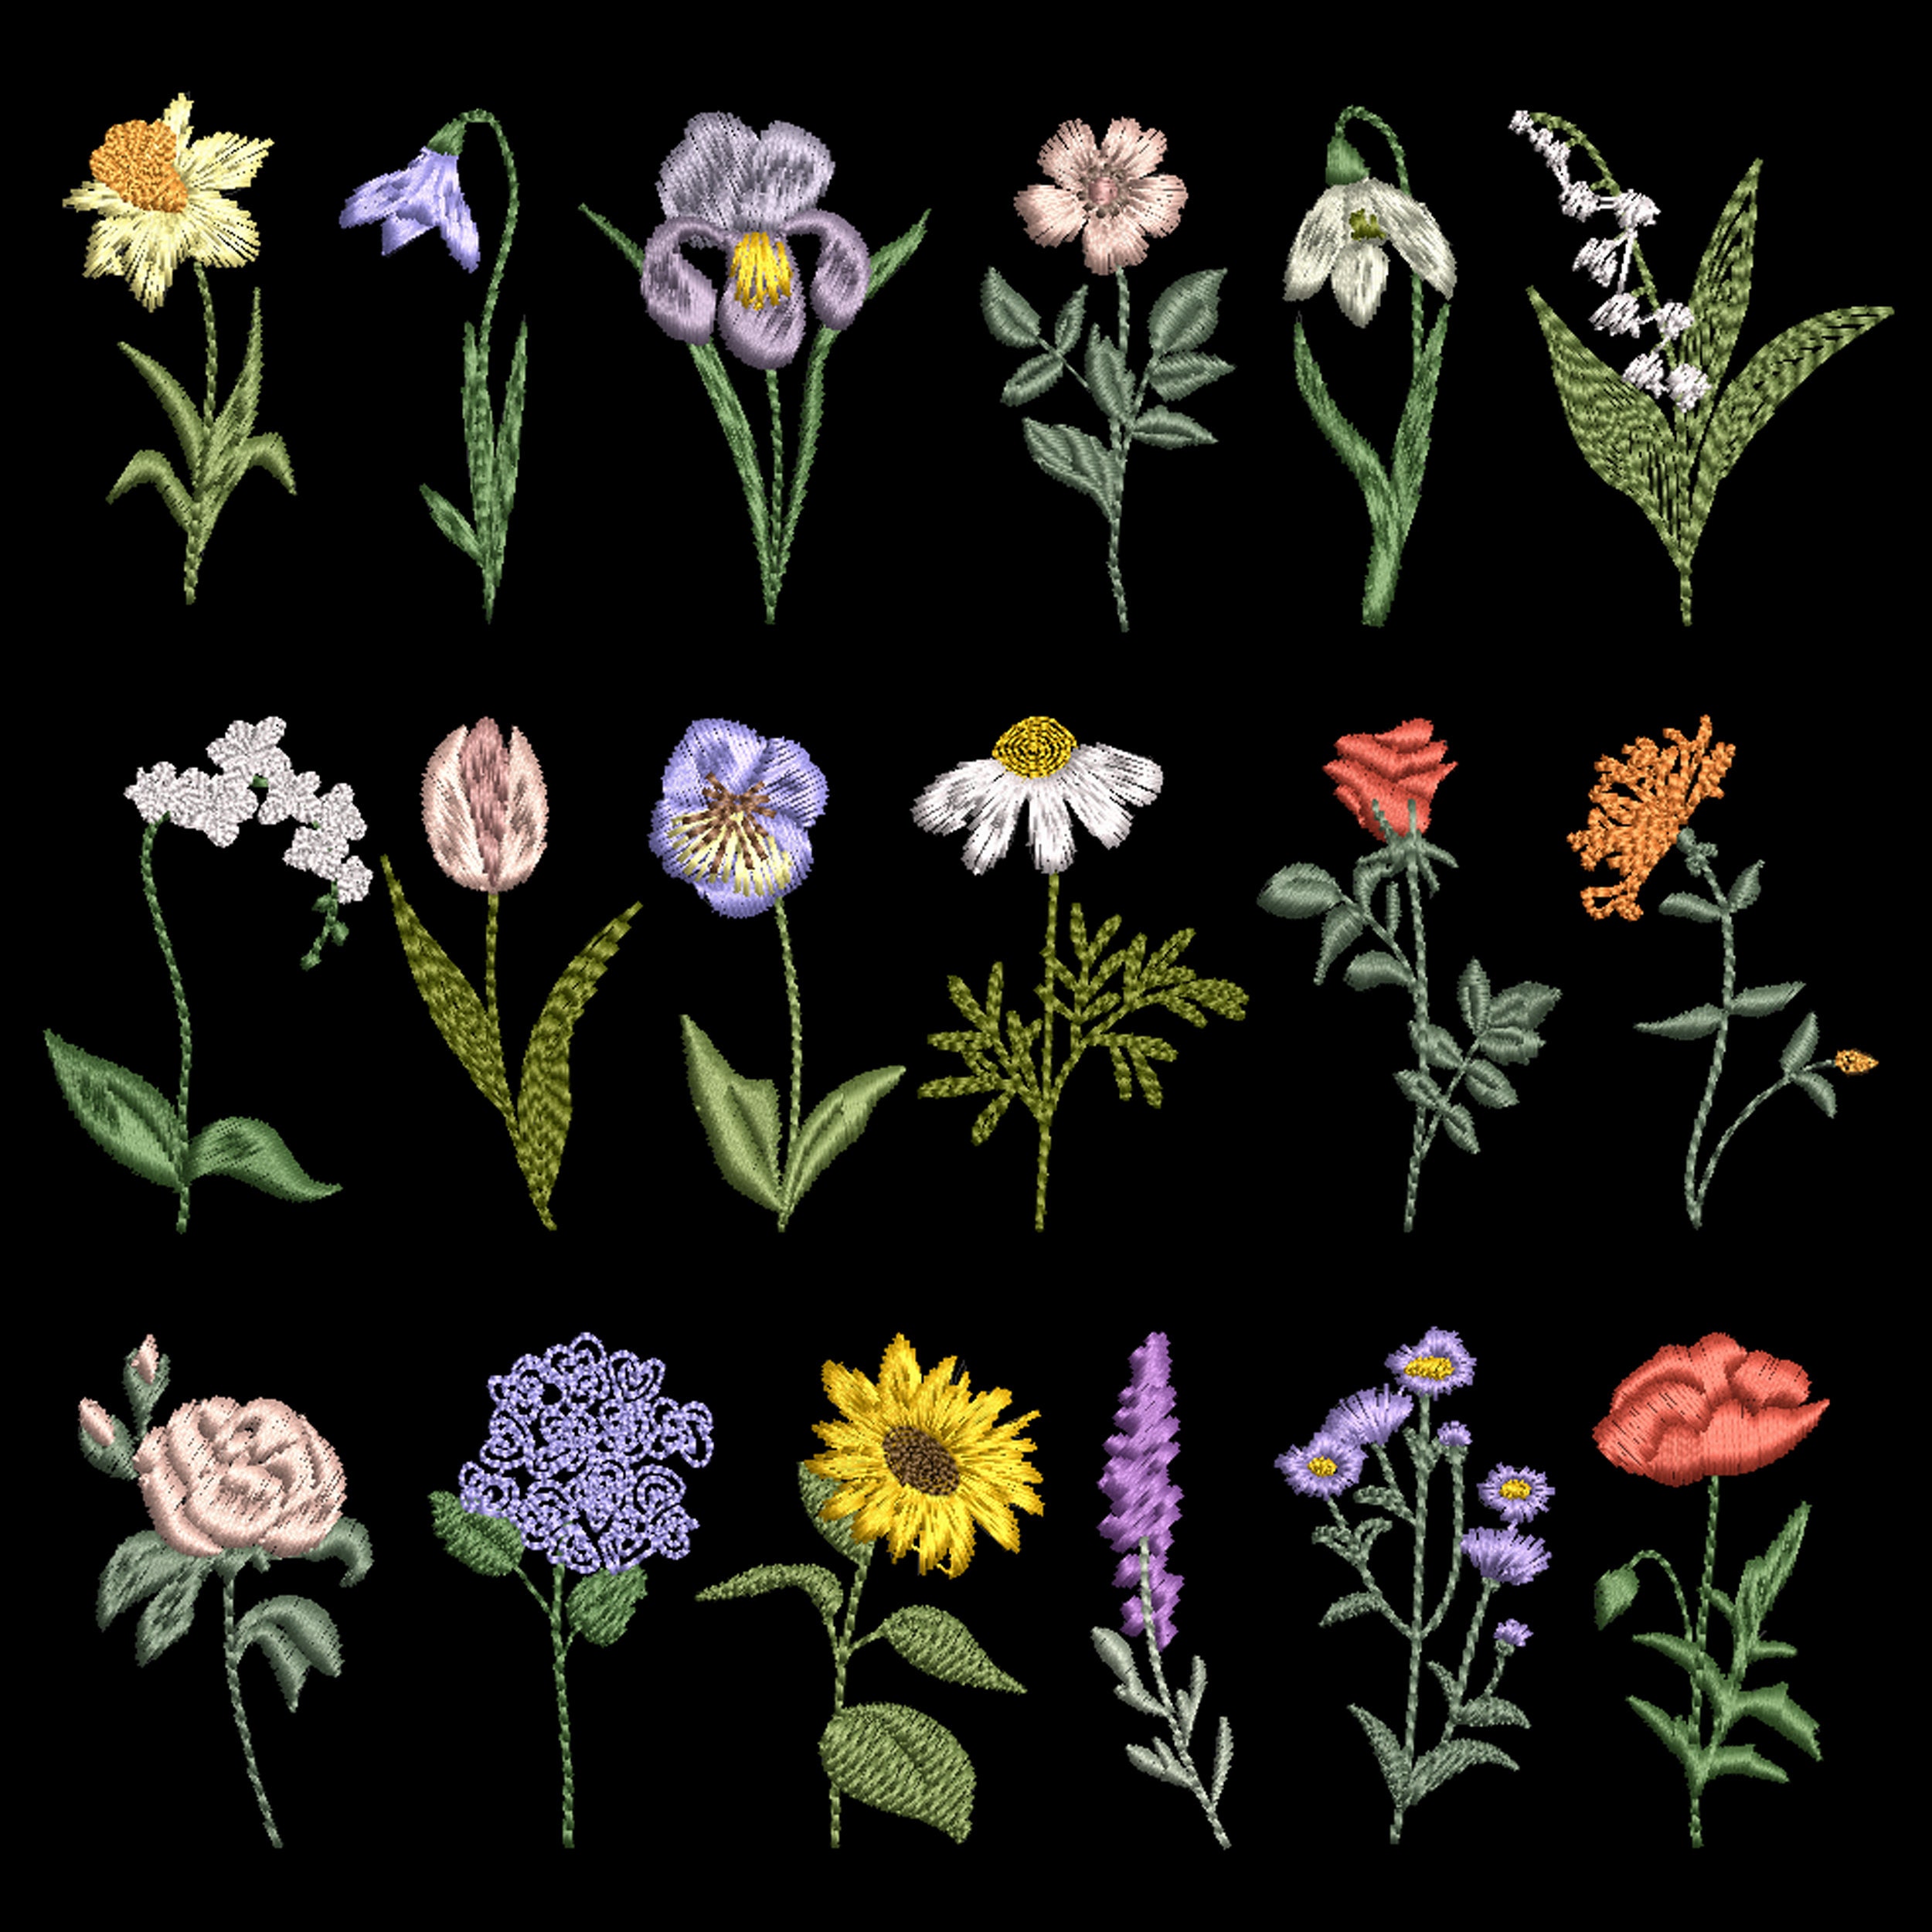 Small Bunch of Wild Flowers Embroidery Kit, code JK-2181 Panna